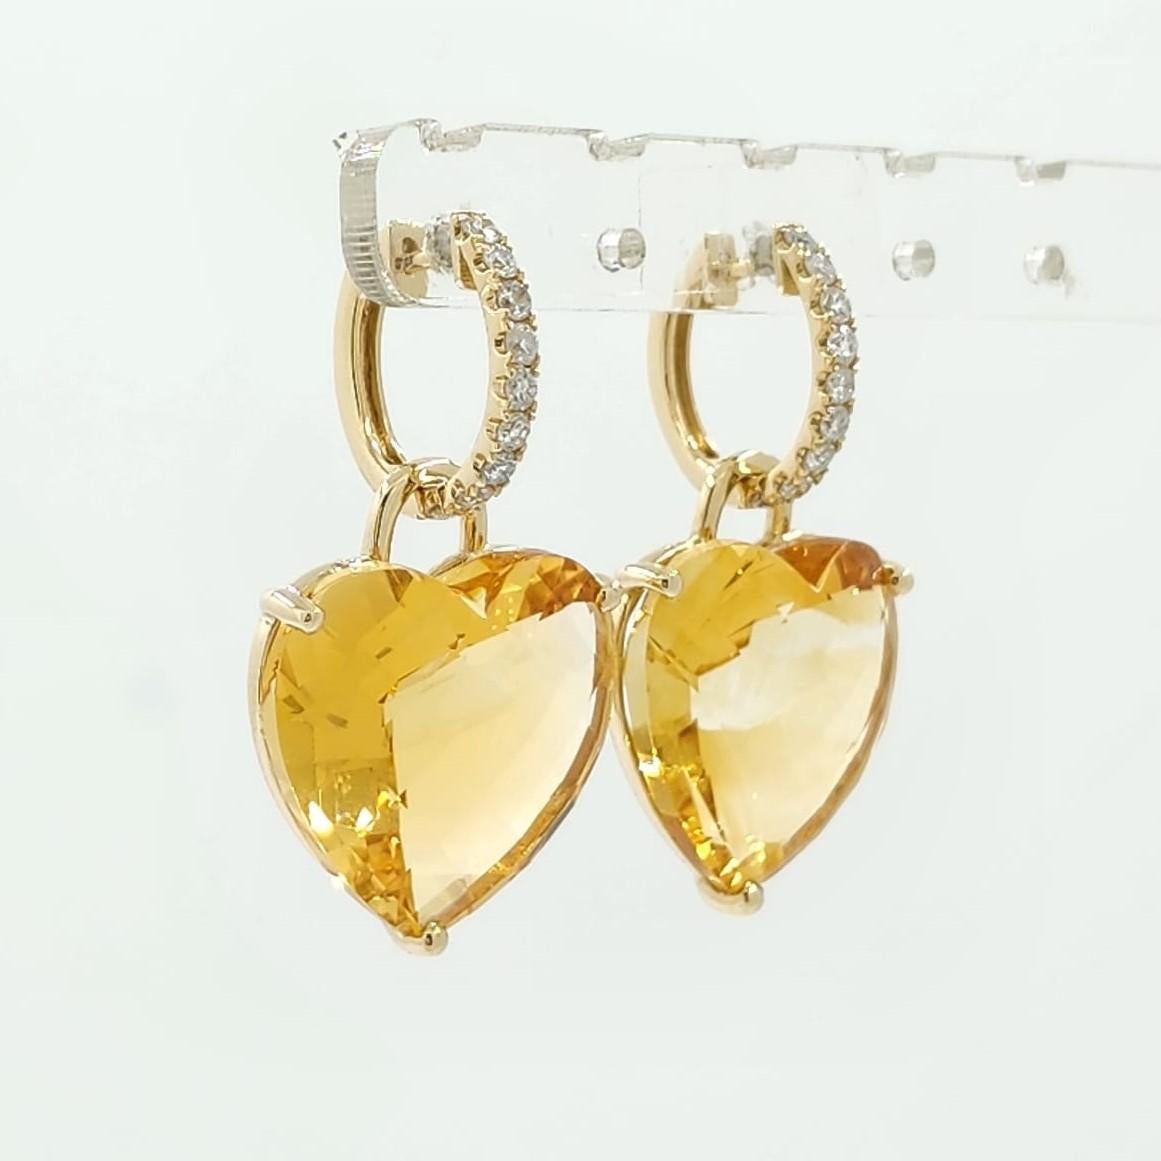 Introducing our exquisite heart-shaped citrine earrings, an emblem of warmth and love meticulously set in radiant 14 karat yellow gold. These earrings are not only remarkable for their luminous citrine stones, weighing a remarkable 28.99 carats but